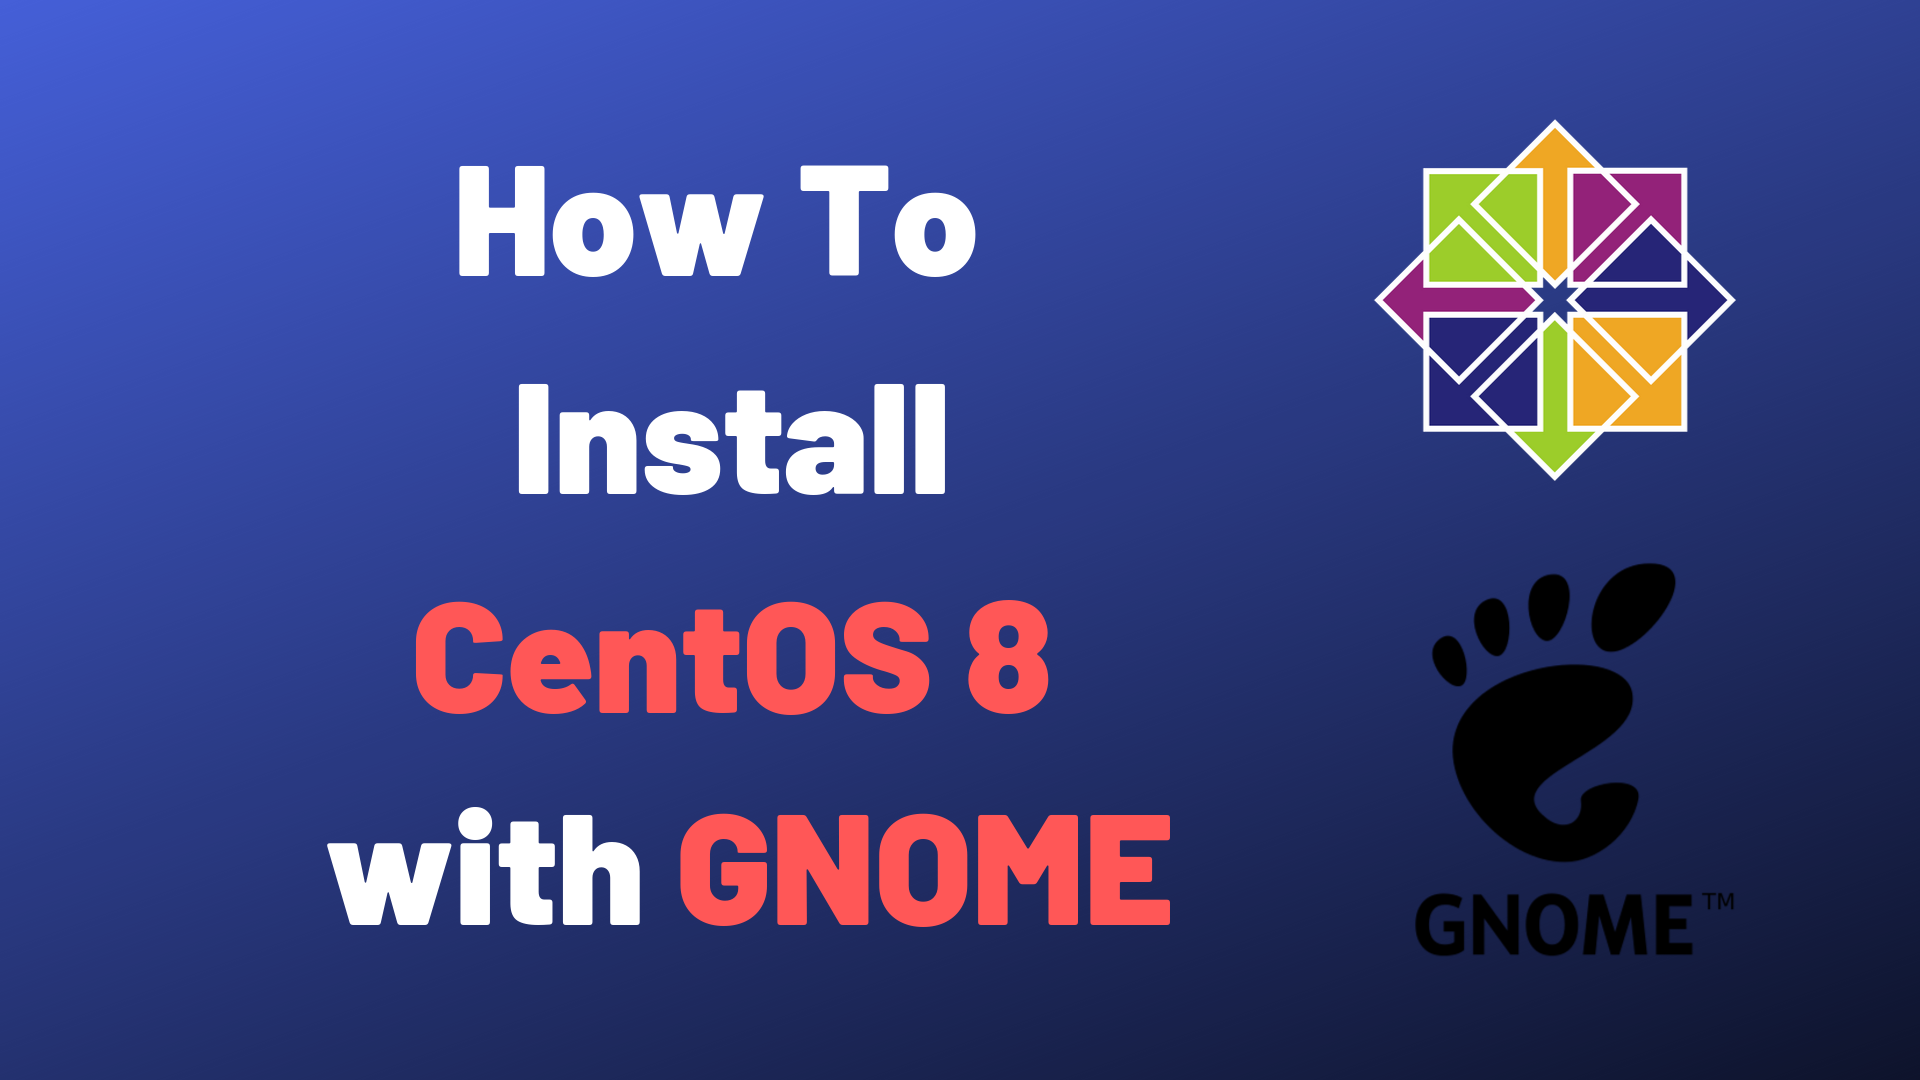 How To Install and Configure CentOS 8 with GNOME